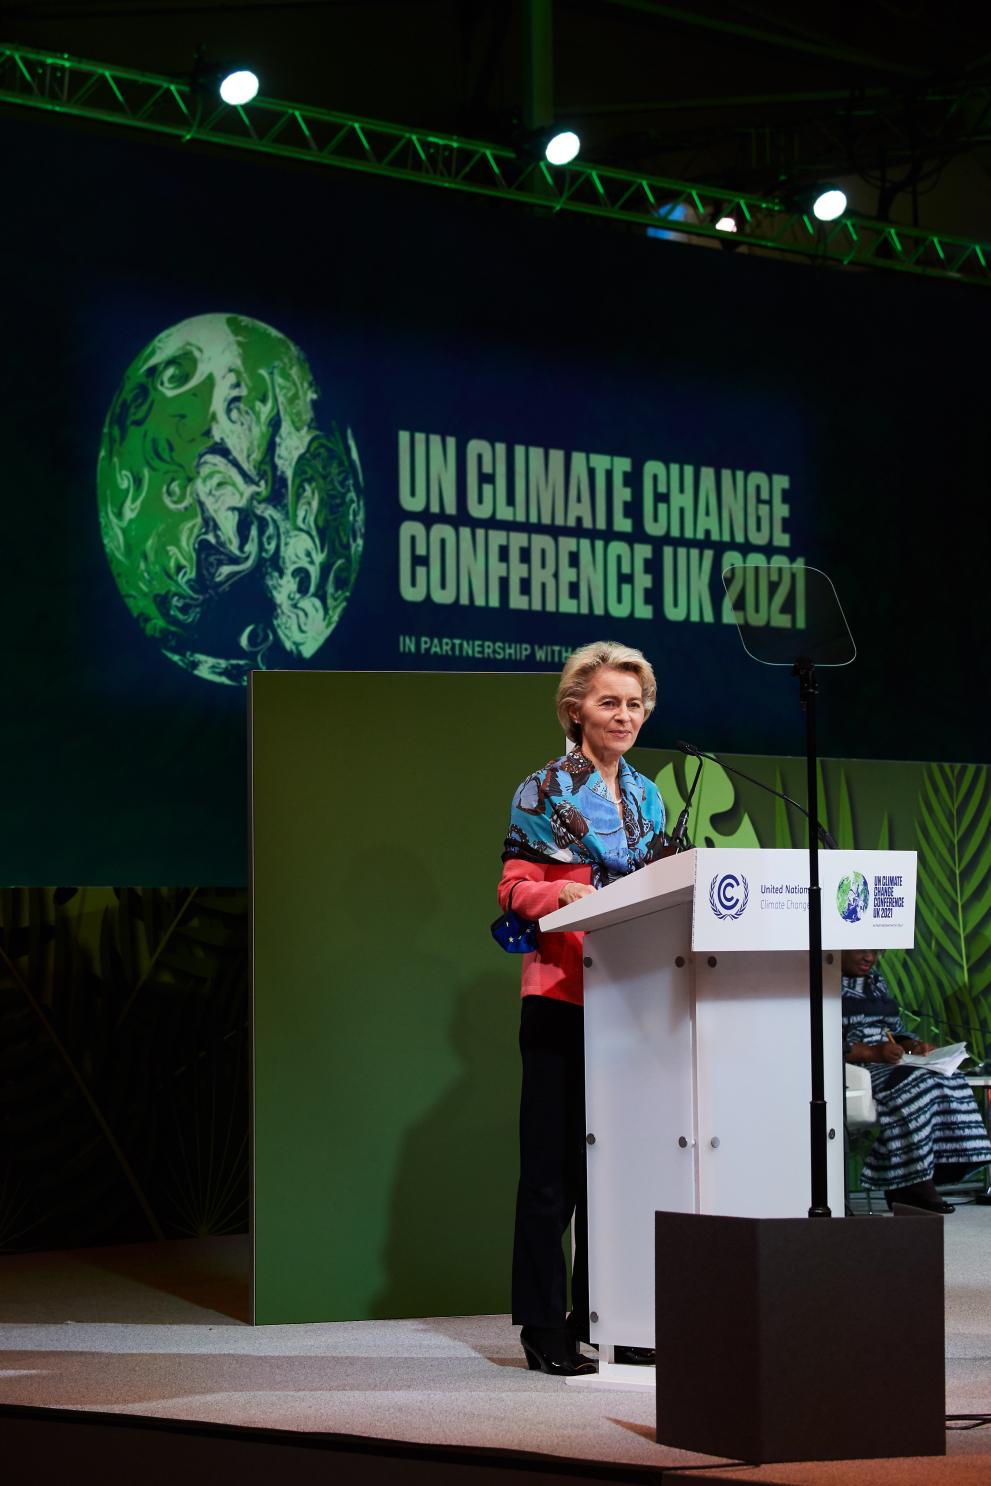 Participation of Ursula von der Leyen, President of the European Comission, in the the UN Climate Conference (COP26) in Glasgow